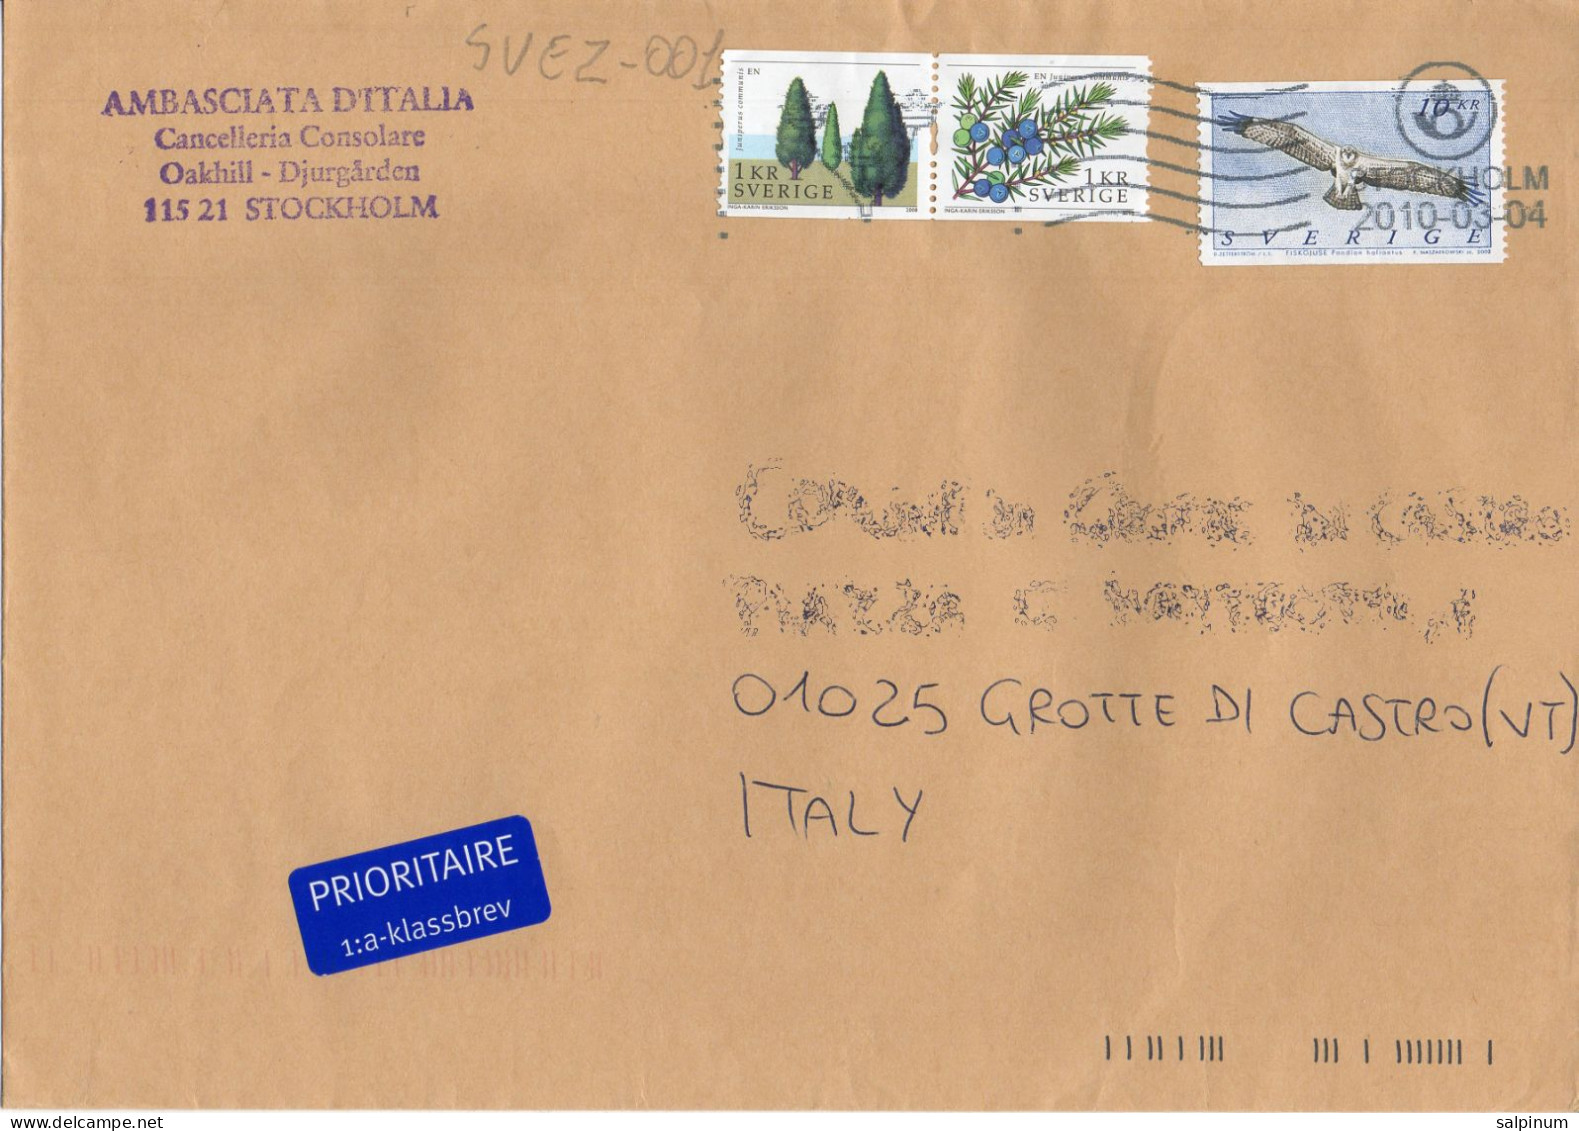 Philatelic Envelope With Stamps Sent From SWEDEN To ITALY - Covers & Documents